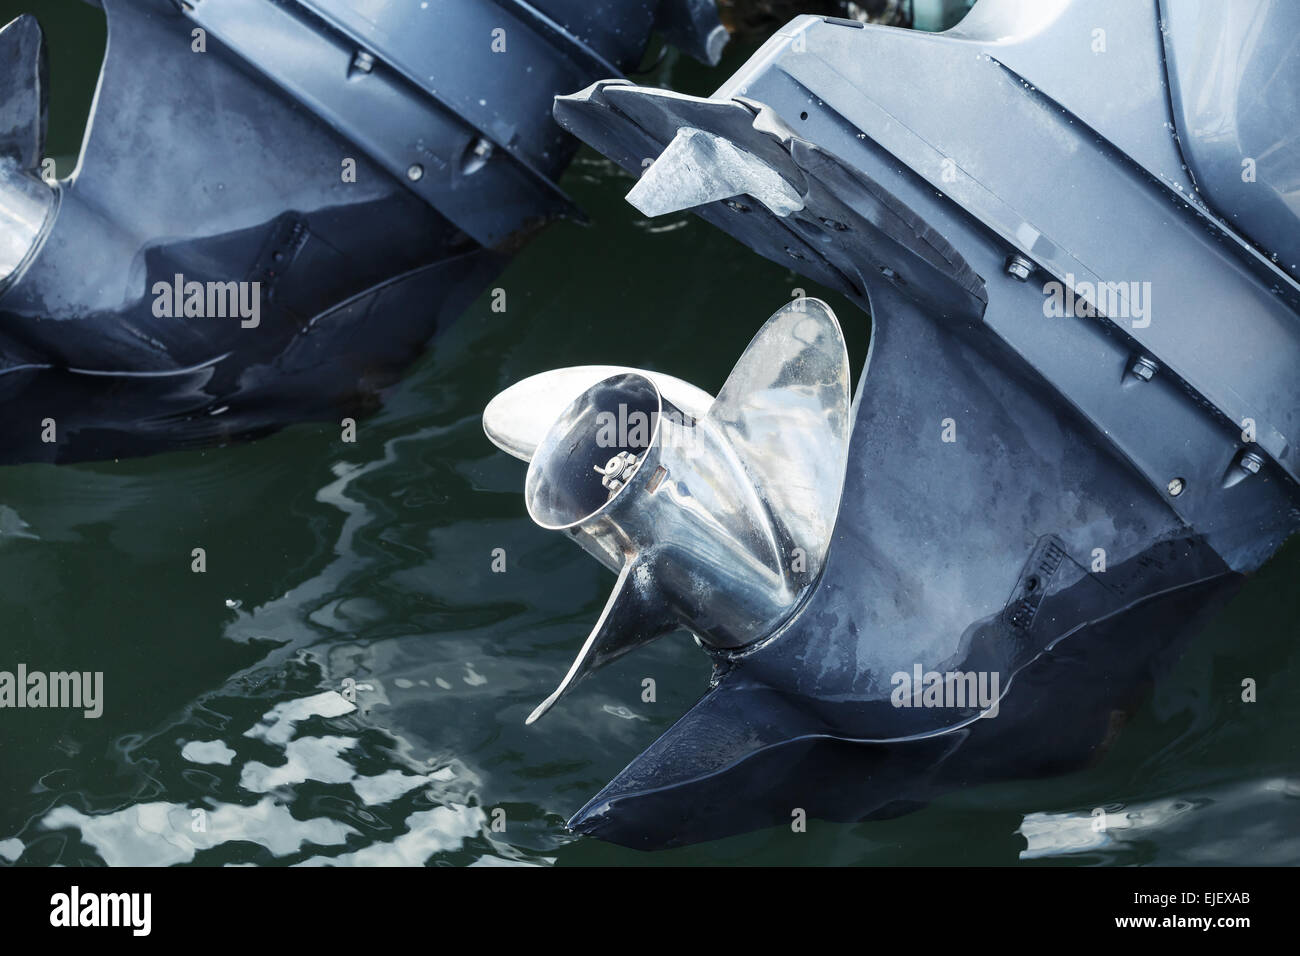 Outboard motor fragment with shining steel propulsion Stock Photo